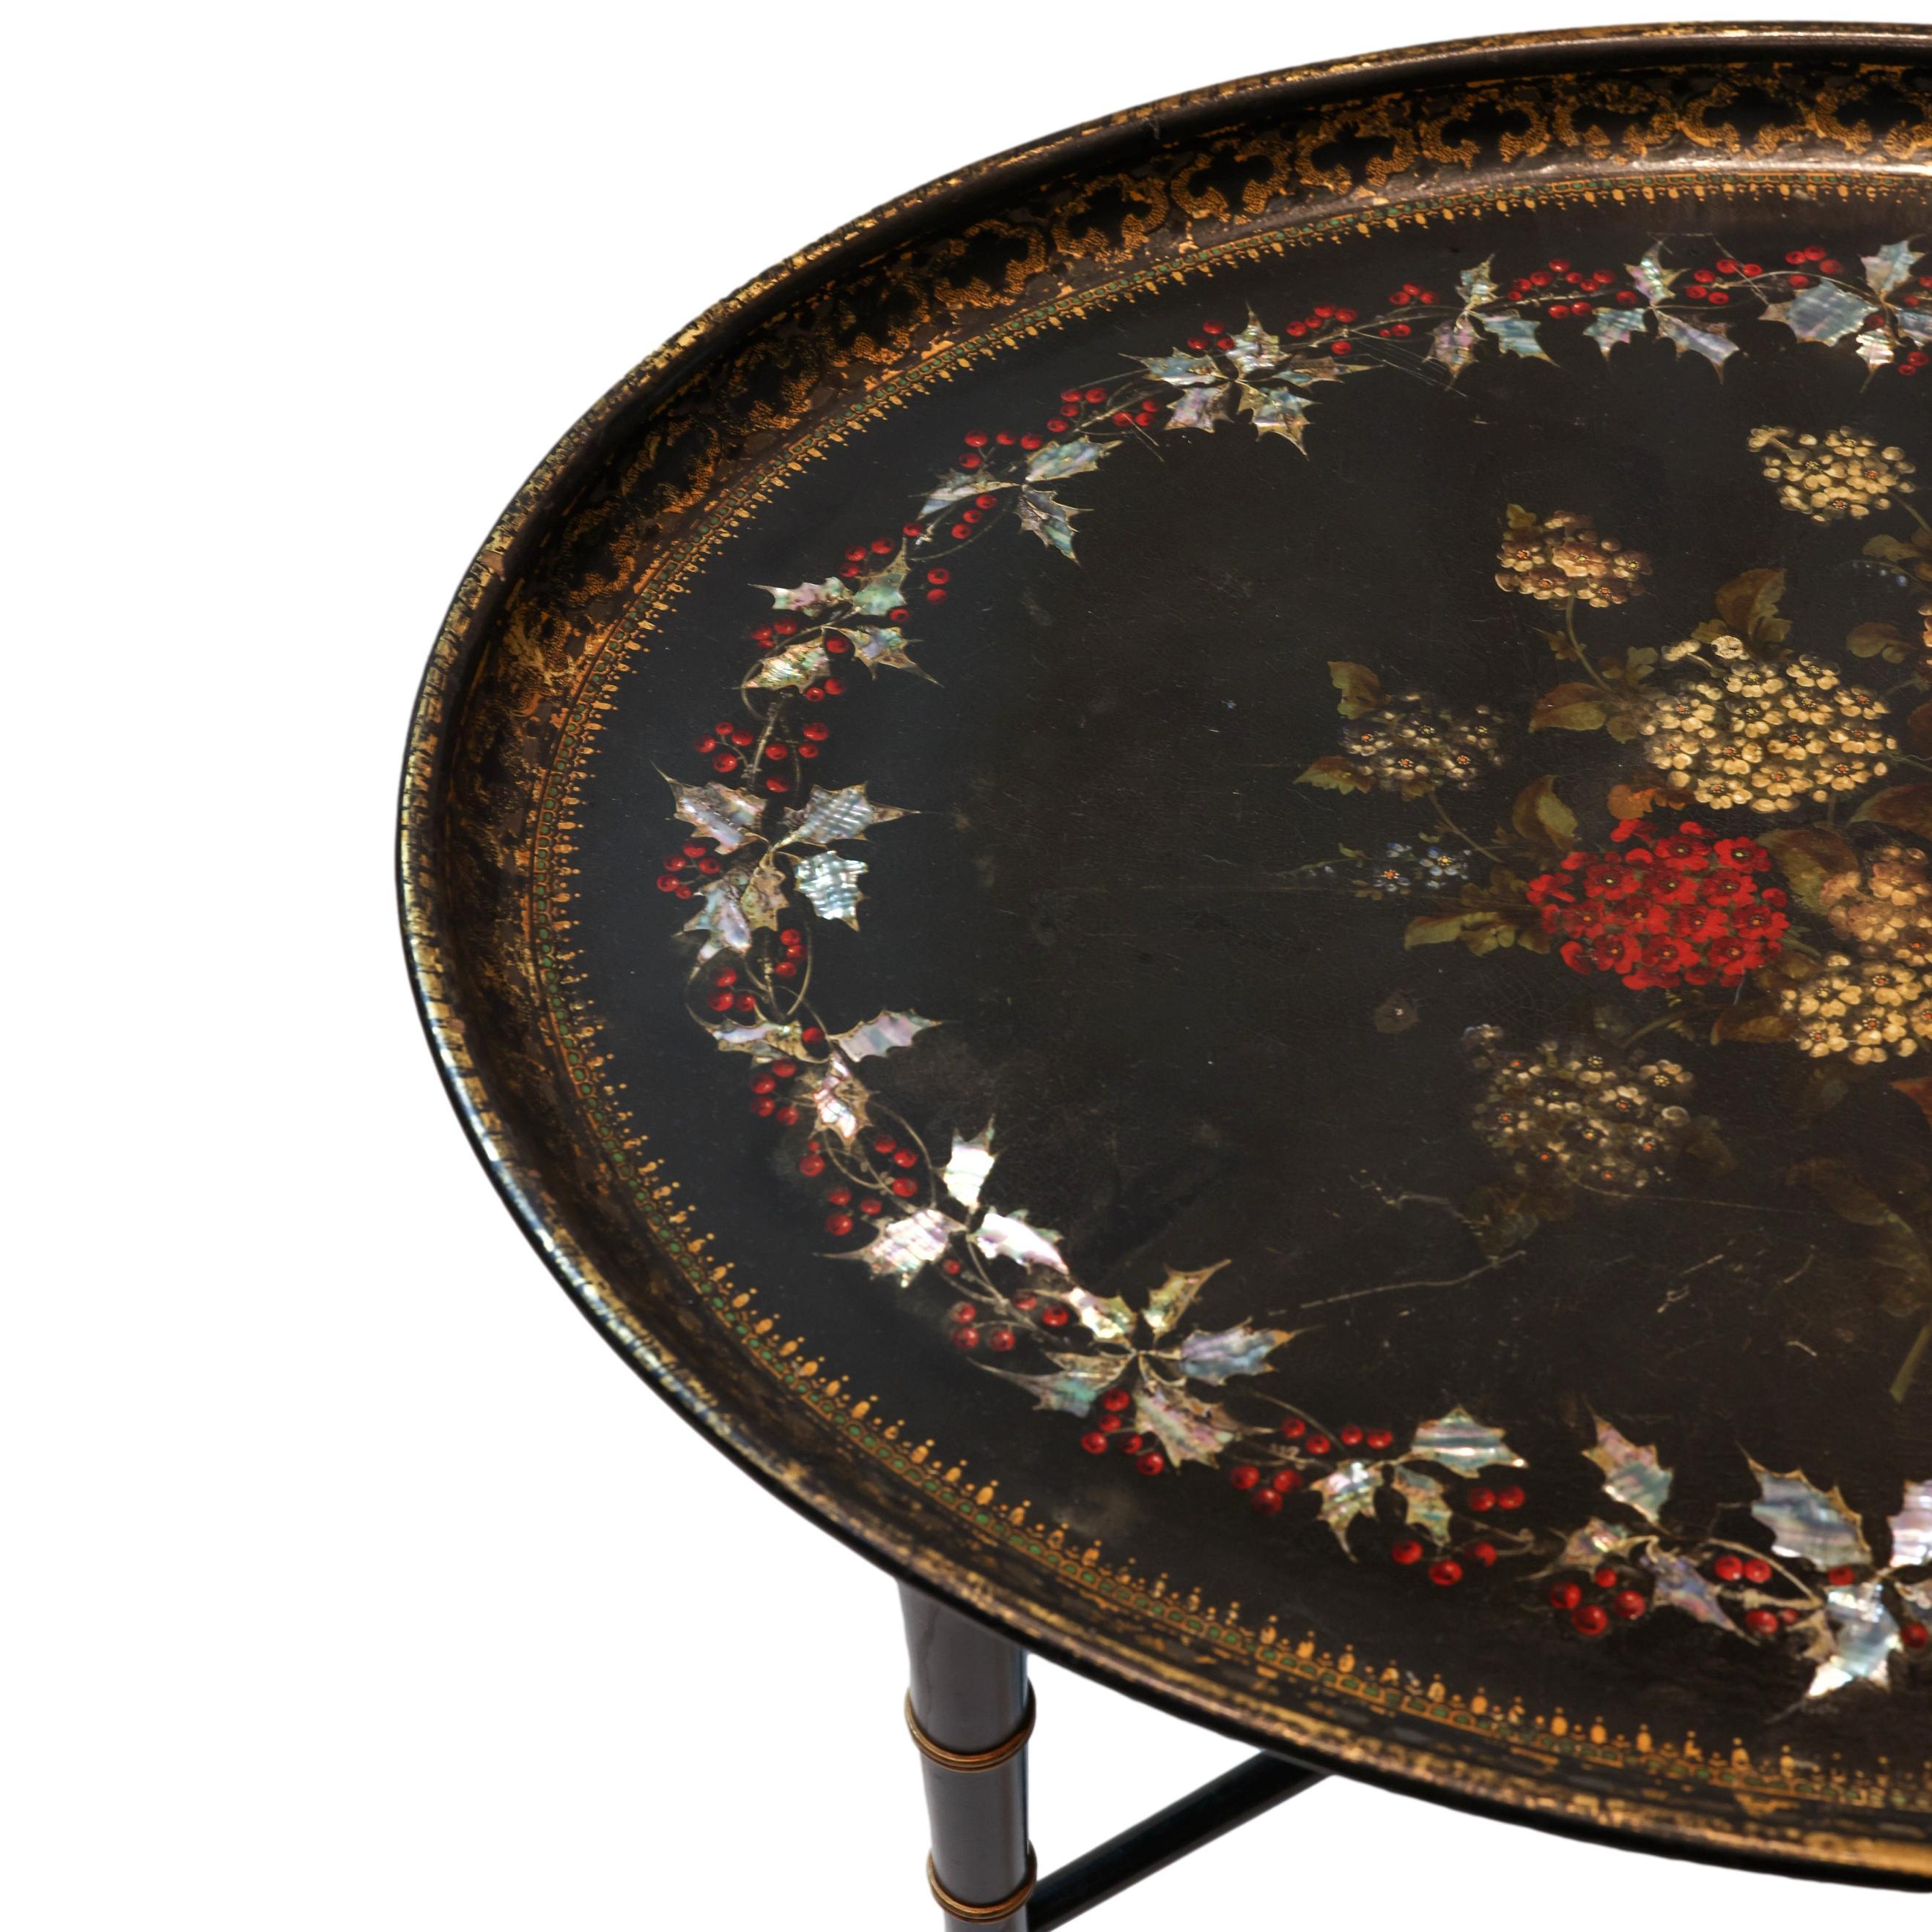 Mother-of-Pearl Inlaid and Ebonized Paper Mache Tray Table, English, ca. 1850 For Sale 3